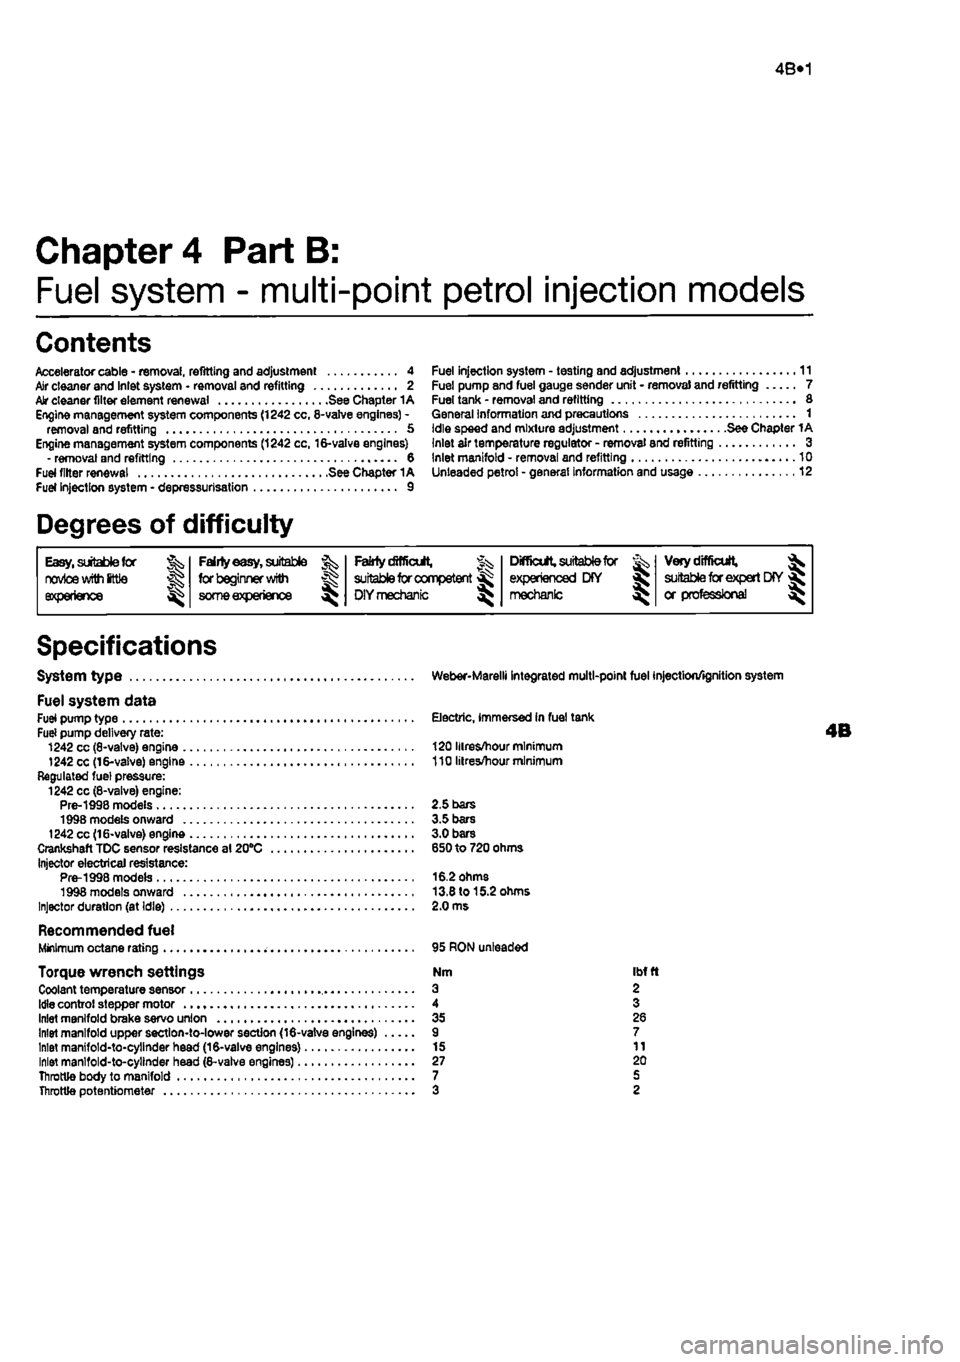 FIAT PUNTO 1995 176 / 1.G Workshop Manual 
4B*1 
Chapter 4 Part B: 
Fuel system - multi-point petrol injection models 
Contents 
Accelerator cable - removal, refitting and adjustment 4 Air cleaner and Inlet system • removal and refitting 2 